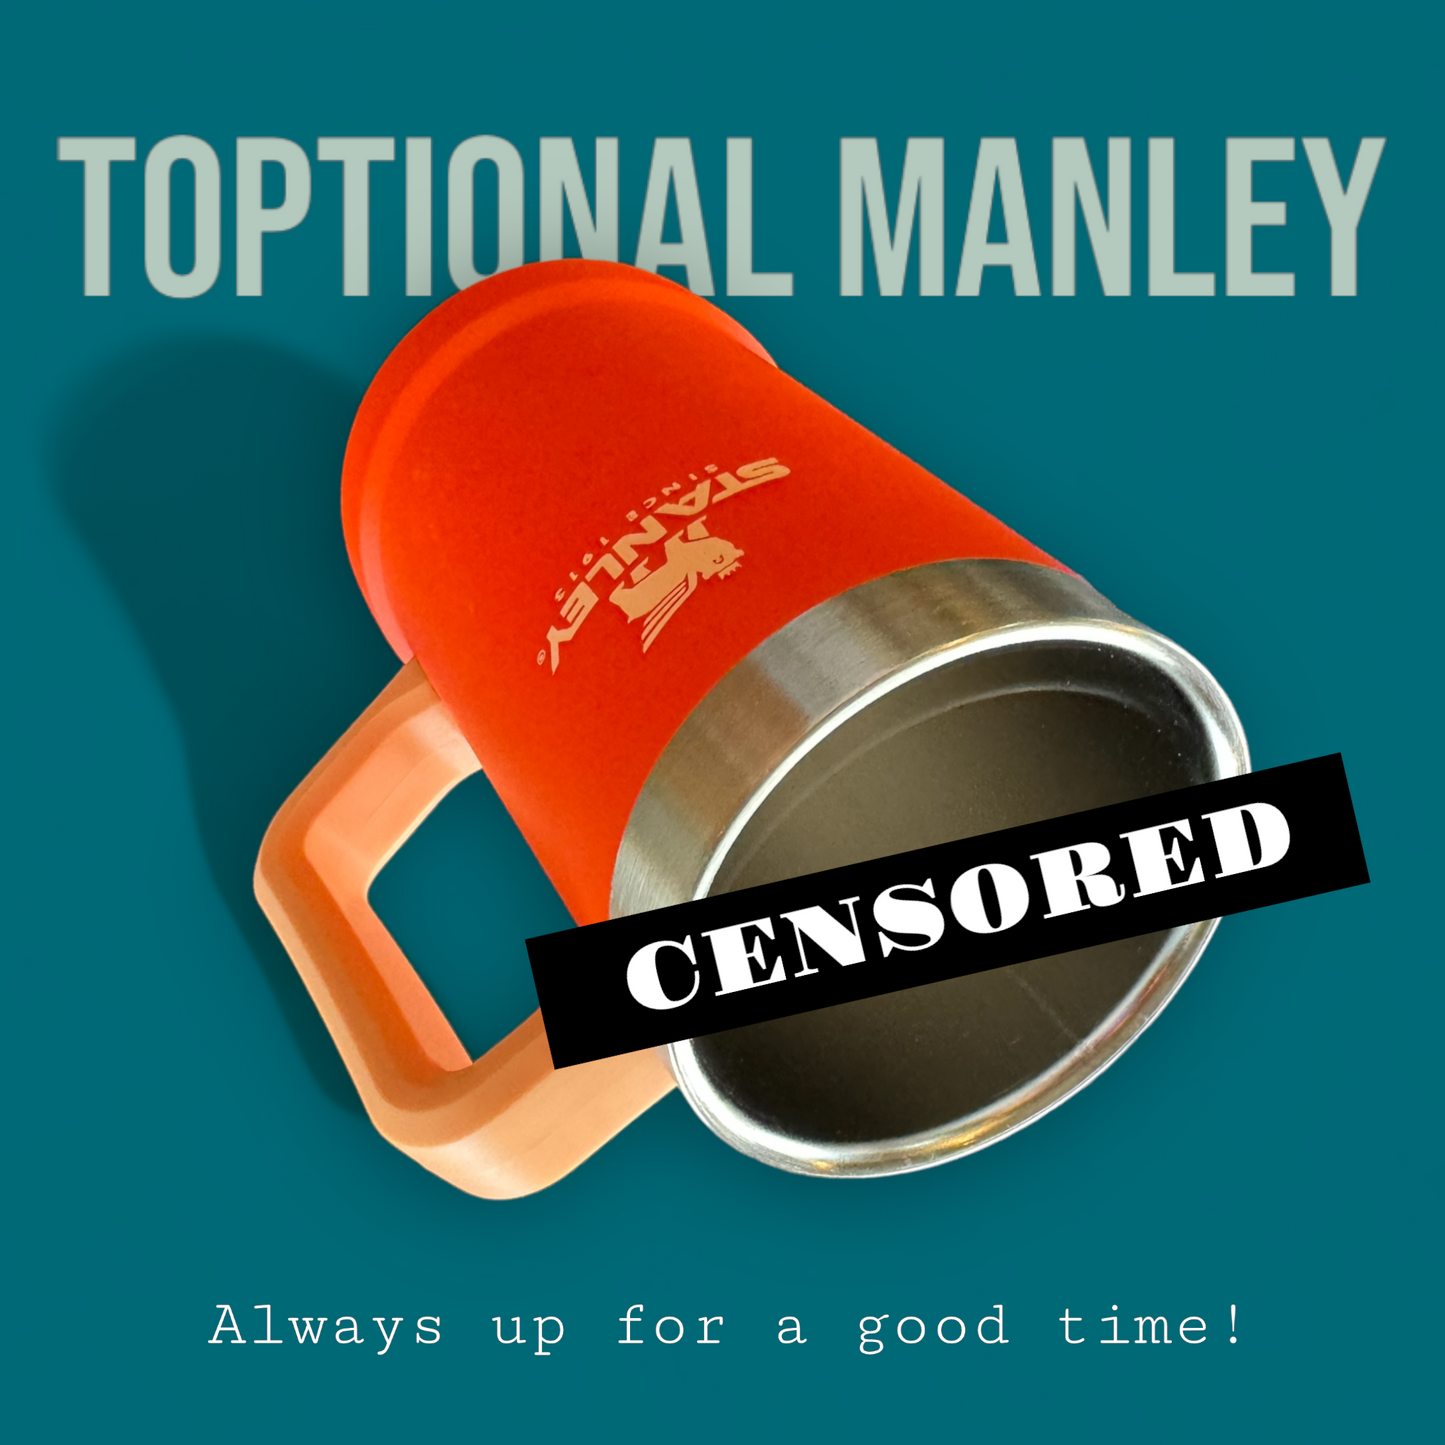 The TOPtional Manley